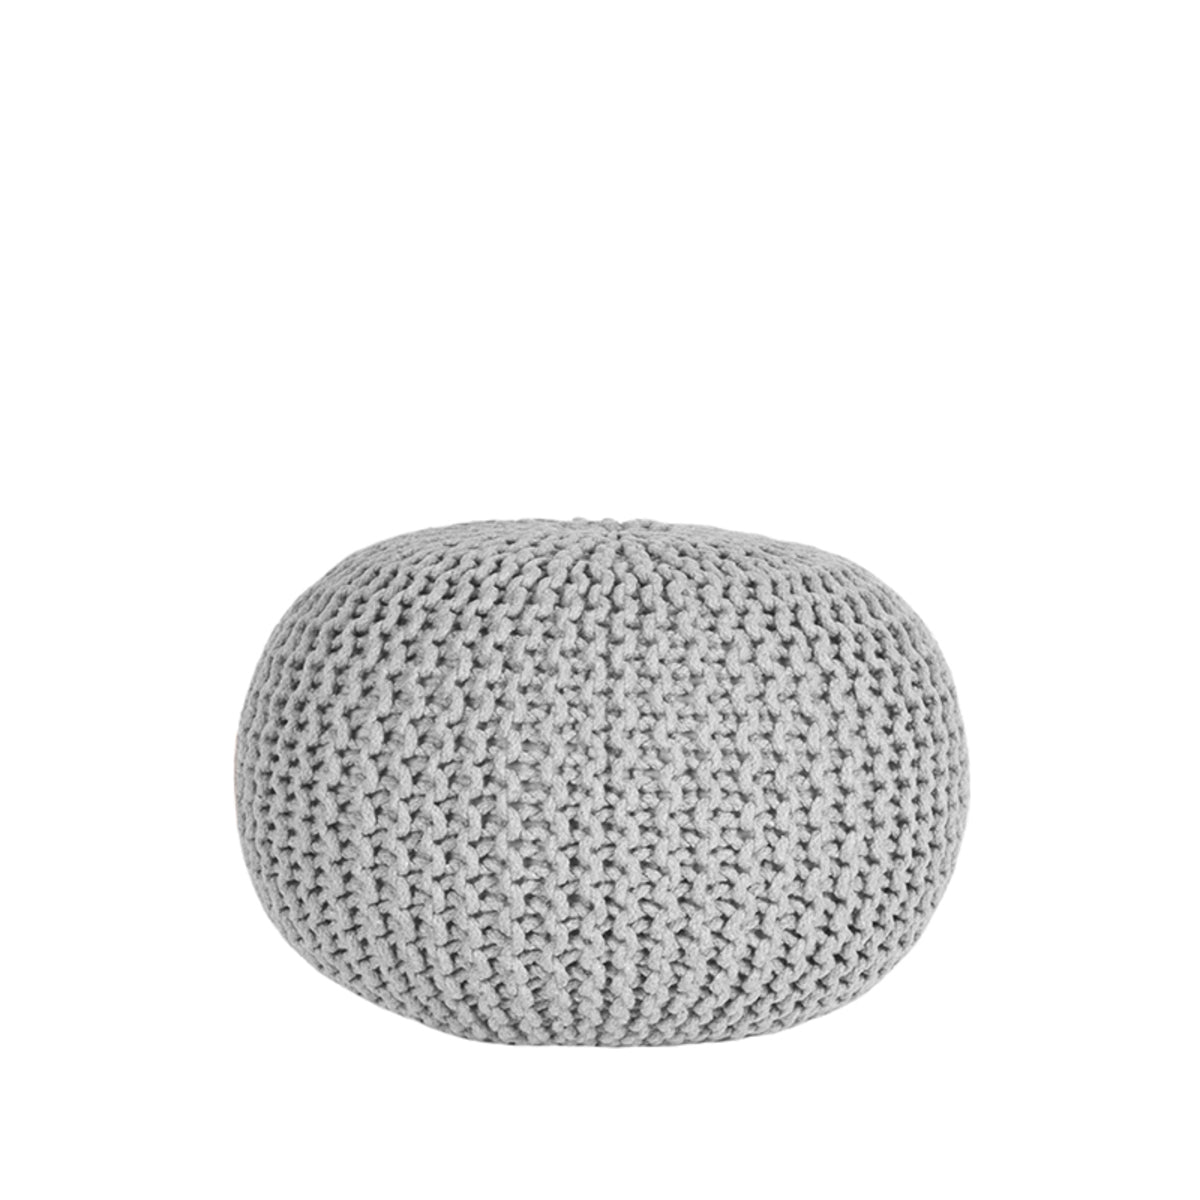 LABEL51 Pouf Knitted - Light gray - Cotton - M